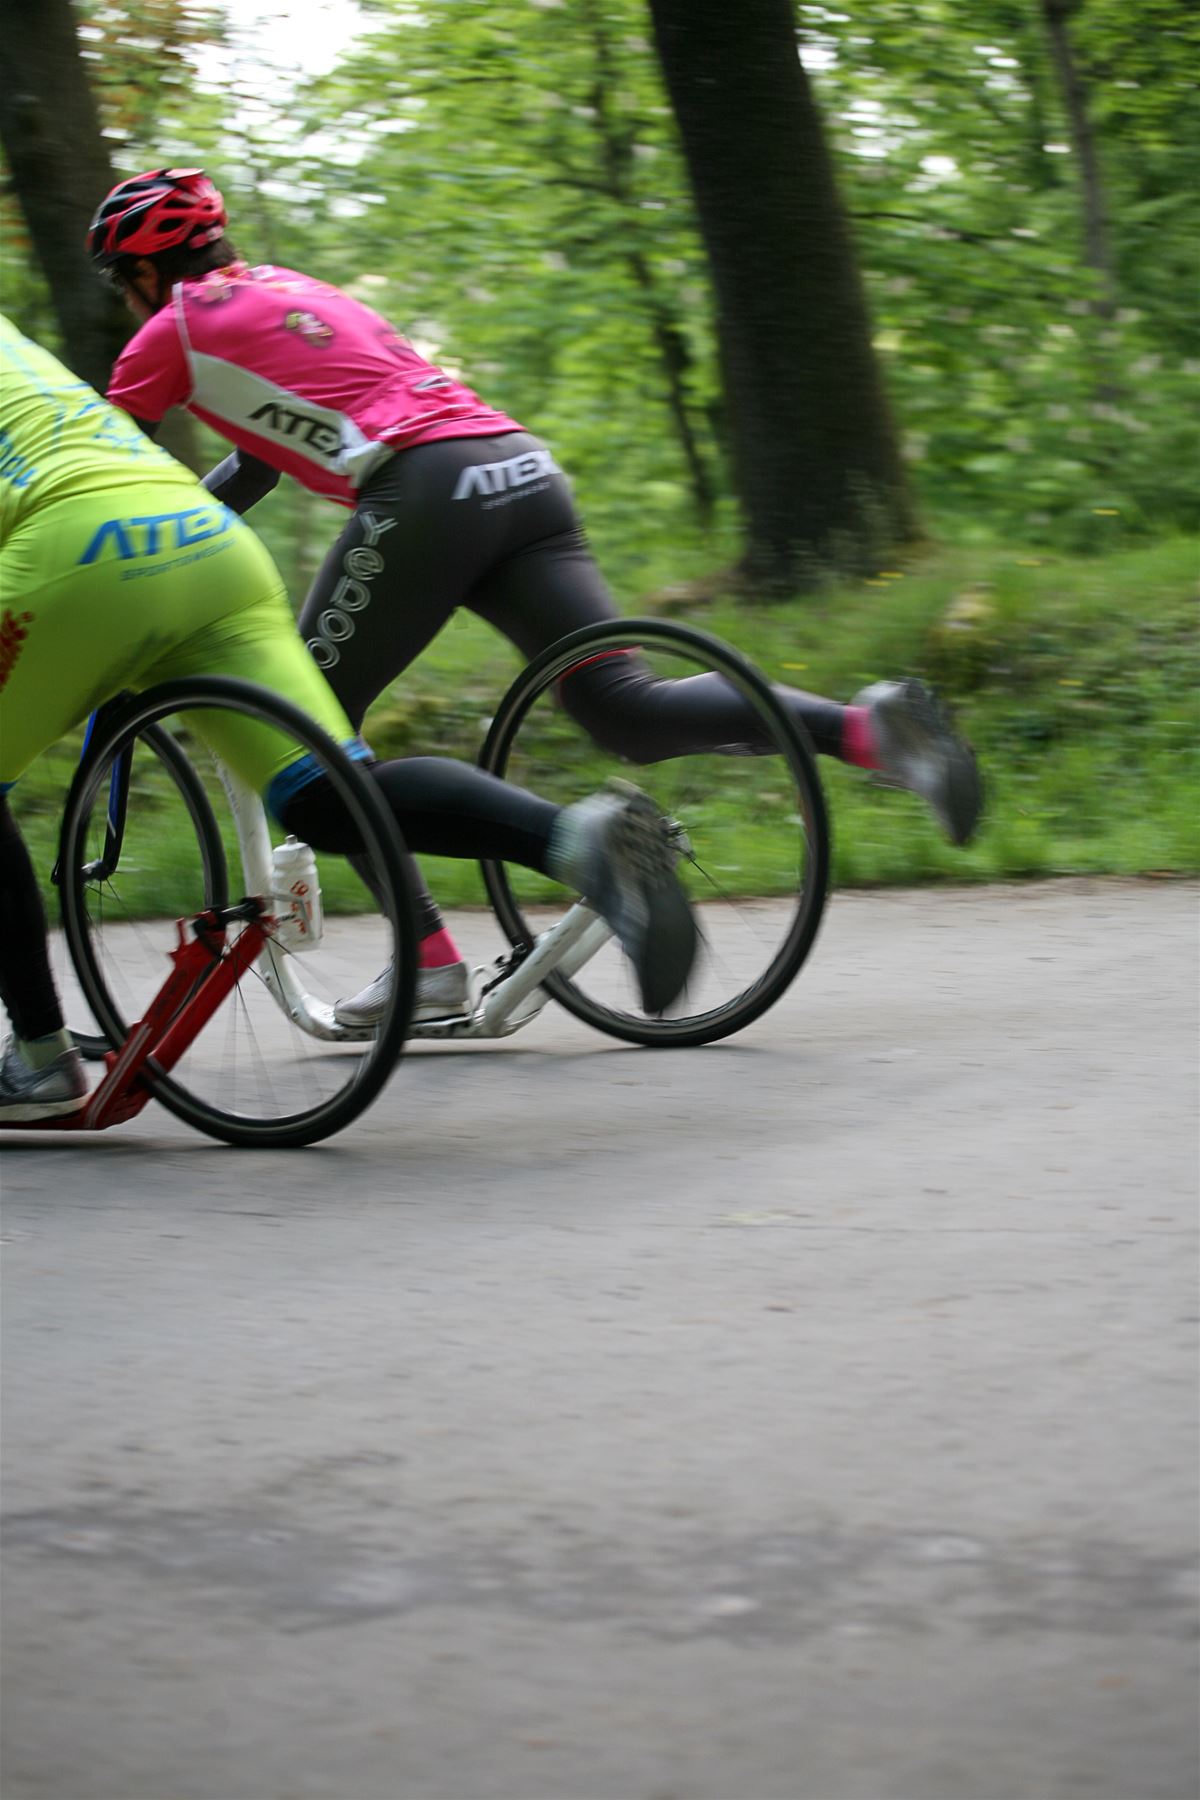 When riding uphill, push off shortly and frequently and switch legs often.